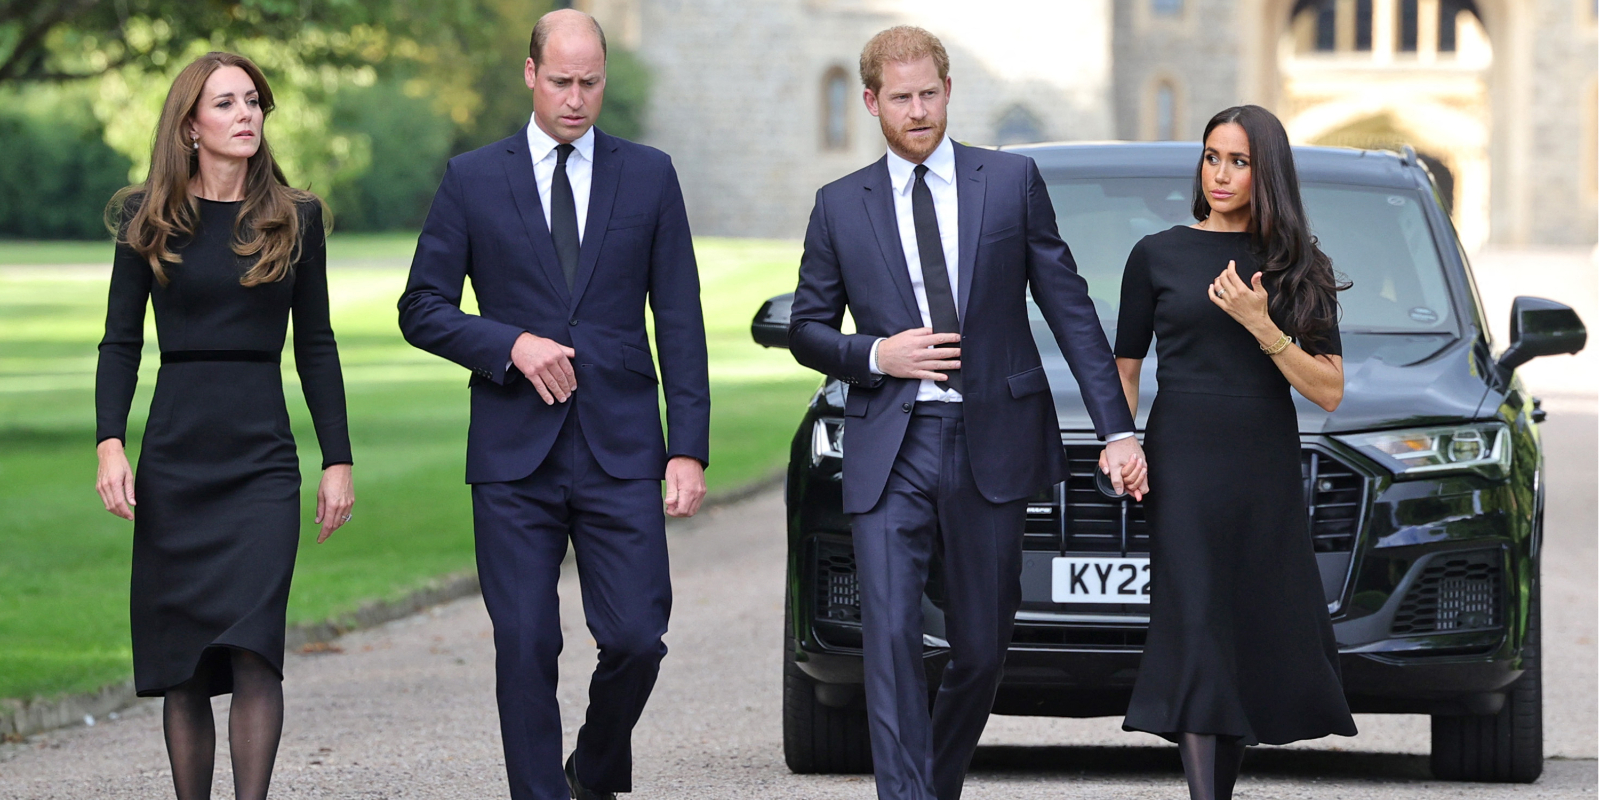 Kate Middleton, Prince WIlliam, Prince Harry and Meghan Markle meet well-wishers after Queen Elizabeth's death in Sept. 2023.